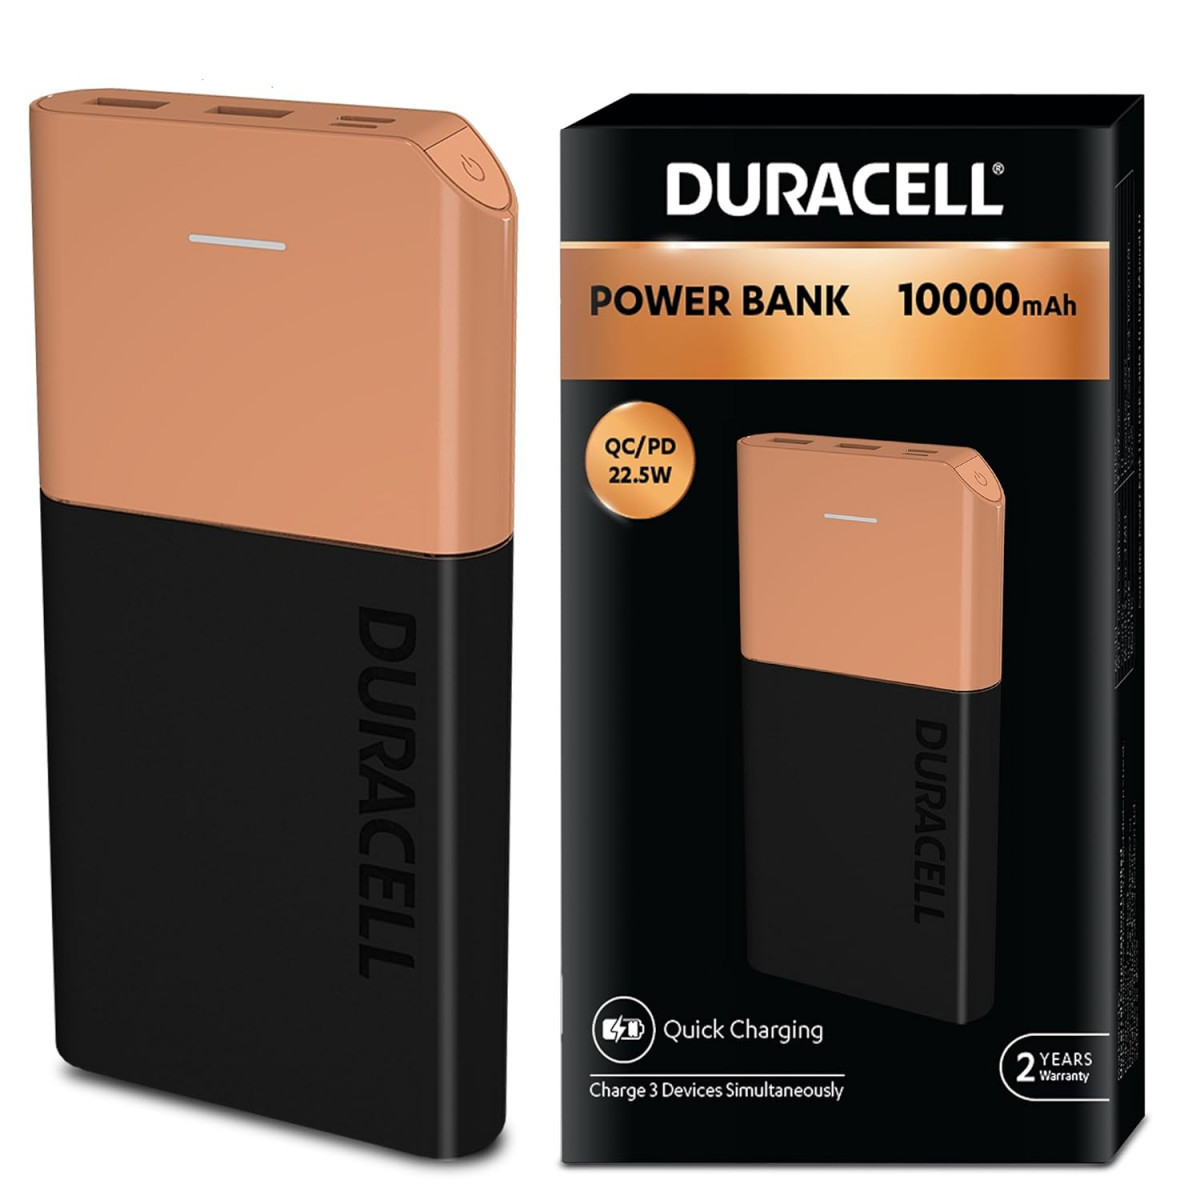 Duracell Power Bank 10000 mAh Portable Charger USB CMicro USB Input USB AUSB C Output Fast Charge Technology